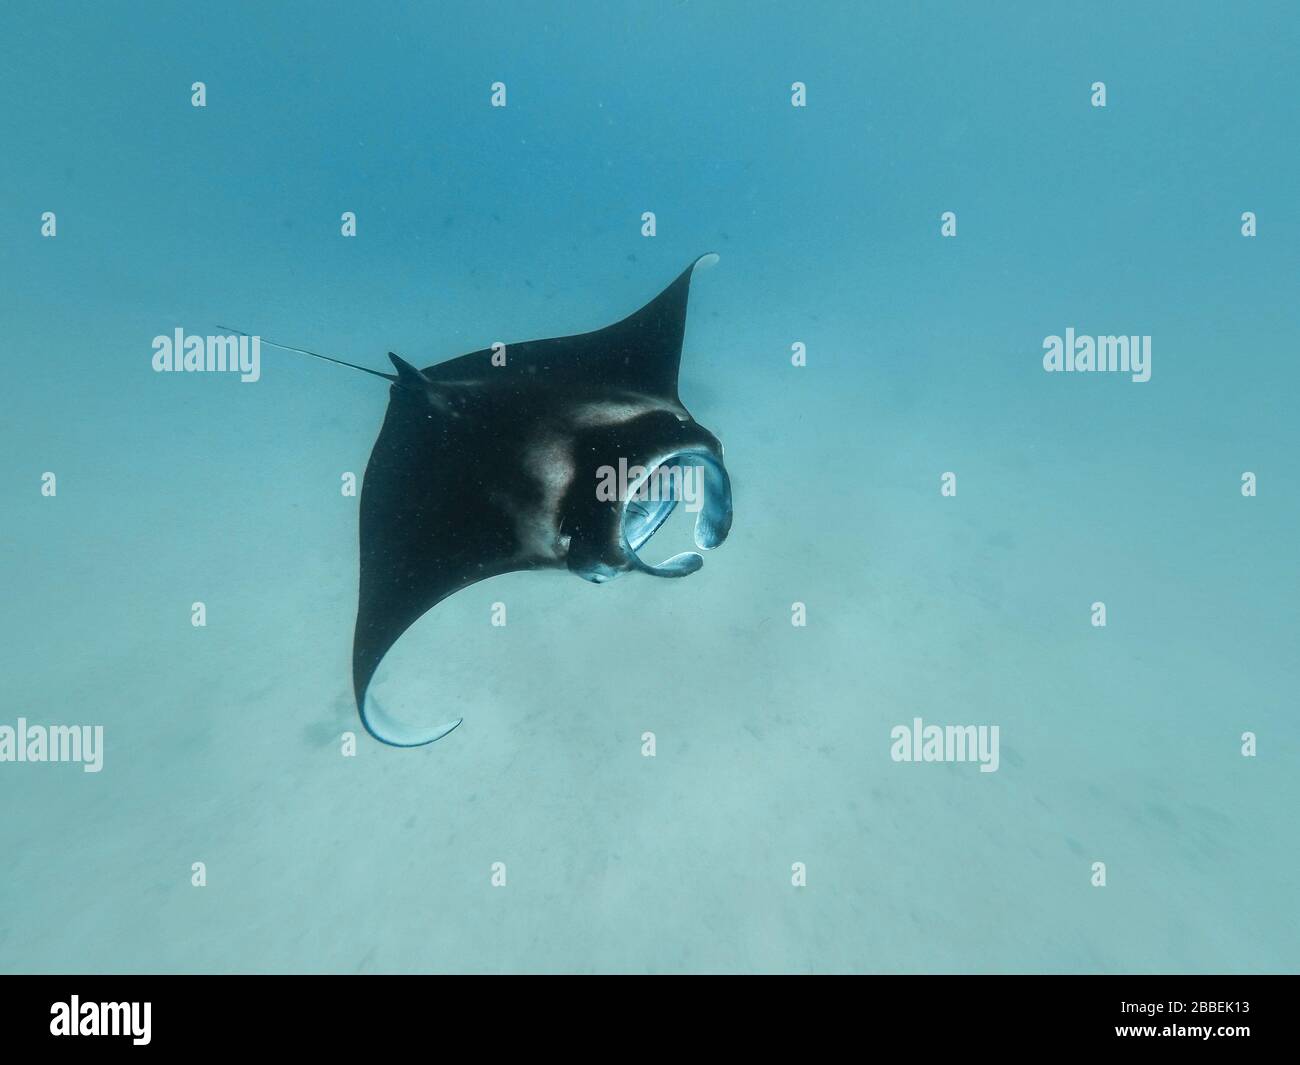 Giant manta ray in shallow water Stock Photo